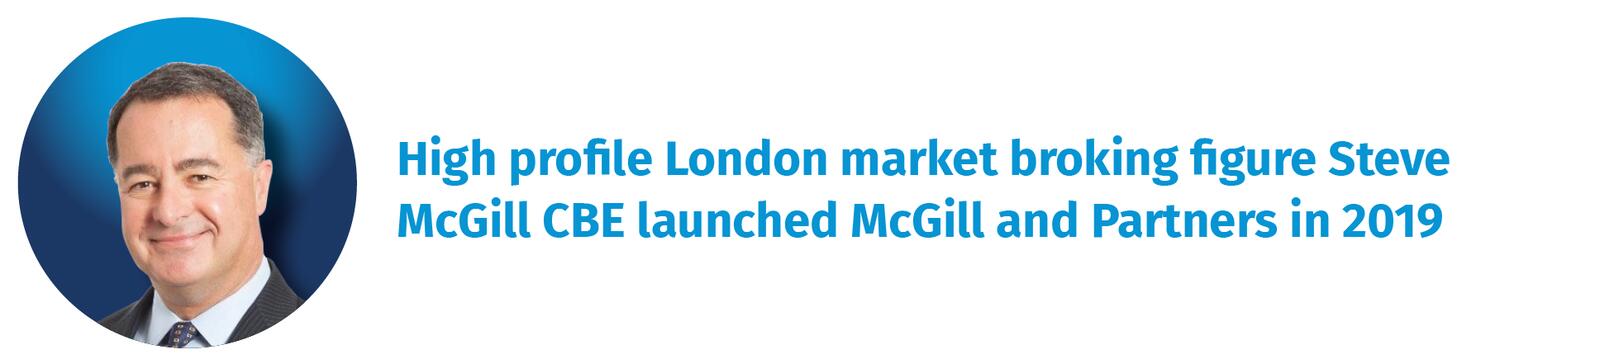 High profile London market broking figure Steve McGill CBE launched McGill and Partners in 2019